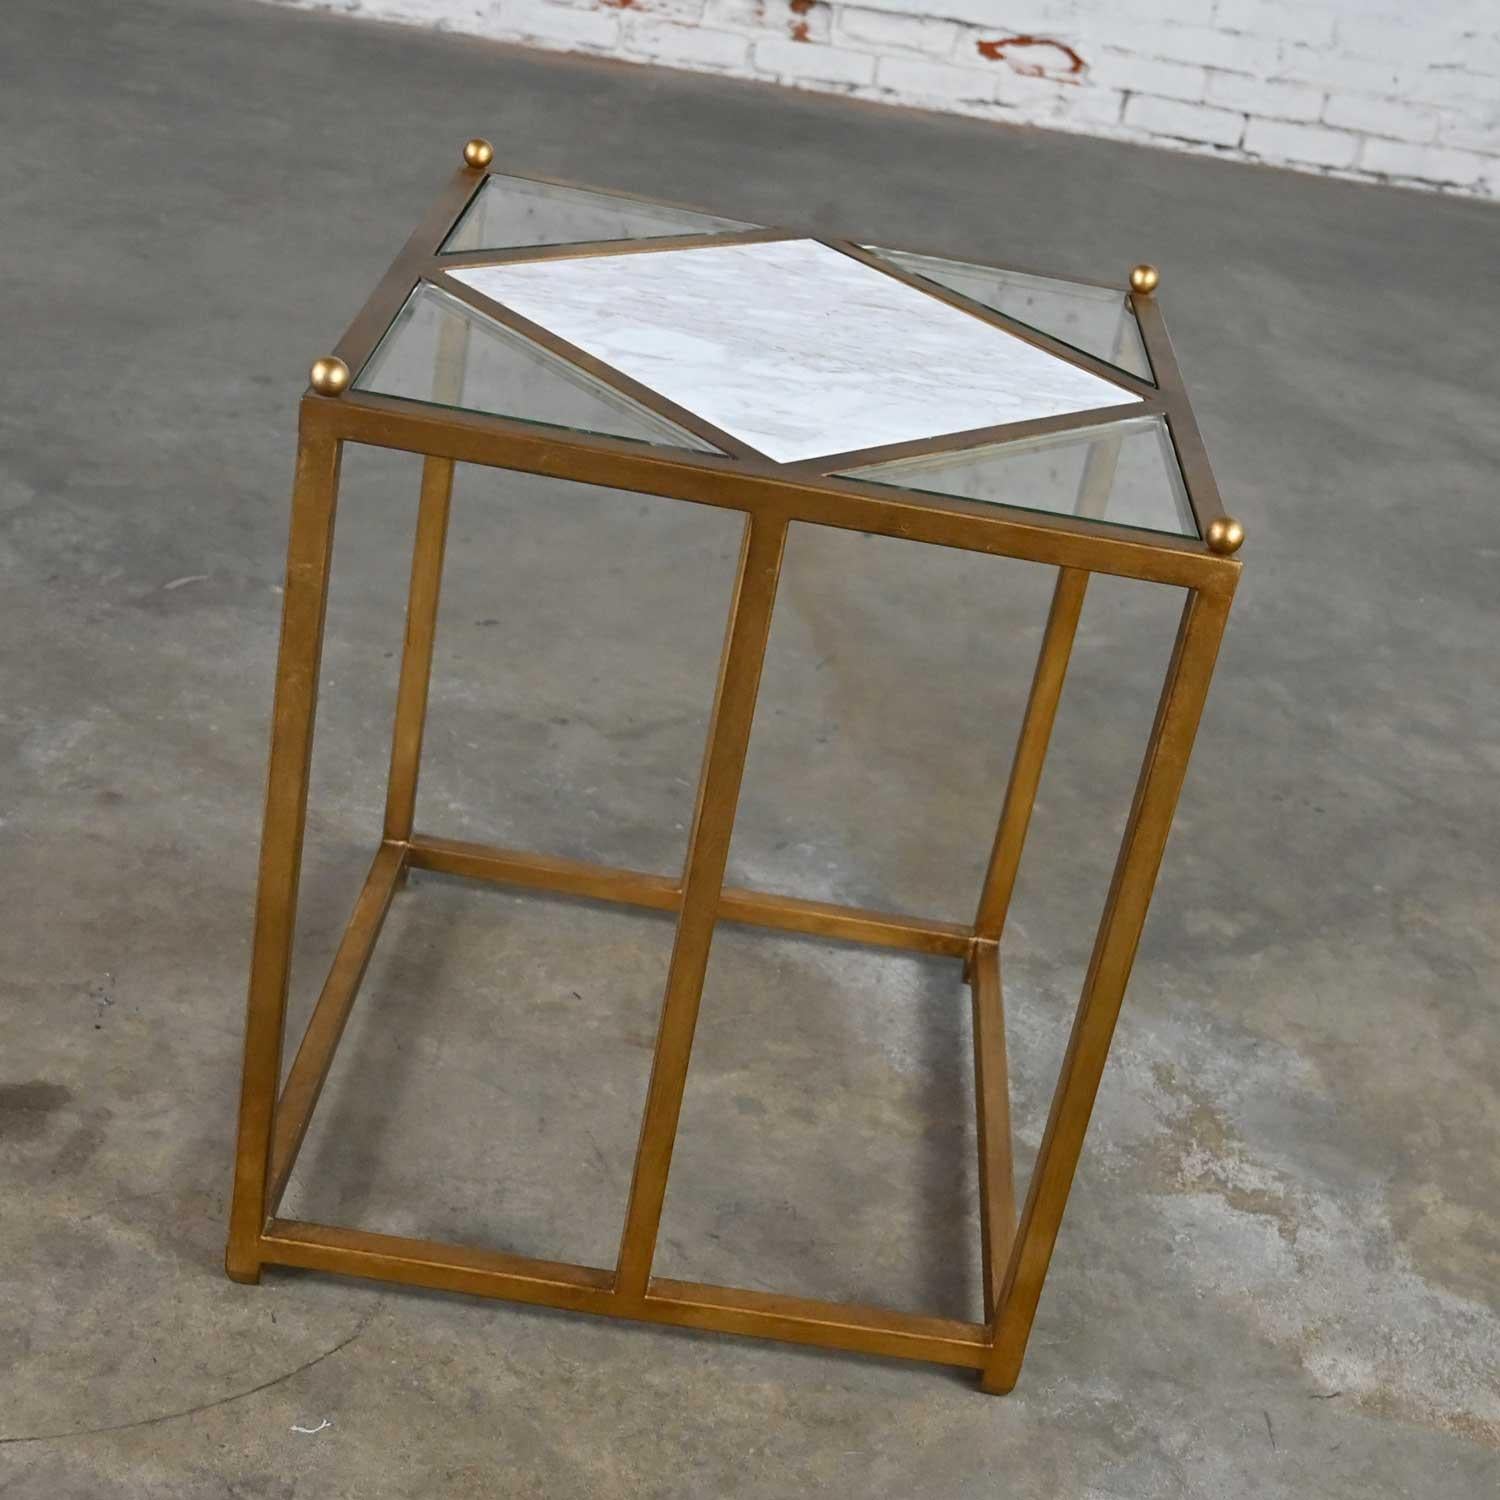 Chelsea House Jamie Merida Collection Iron Antique Gold Leaf Harlequin End Table In Good Condition For Sale In Topeka, KS